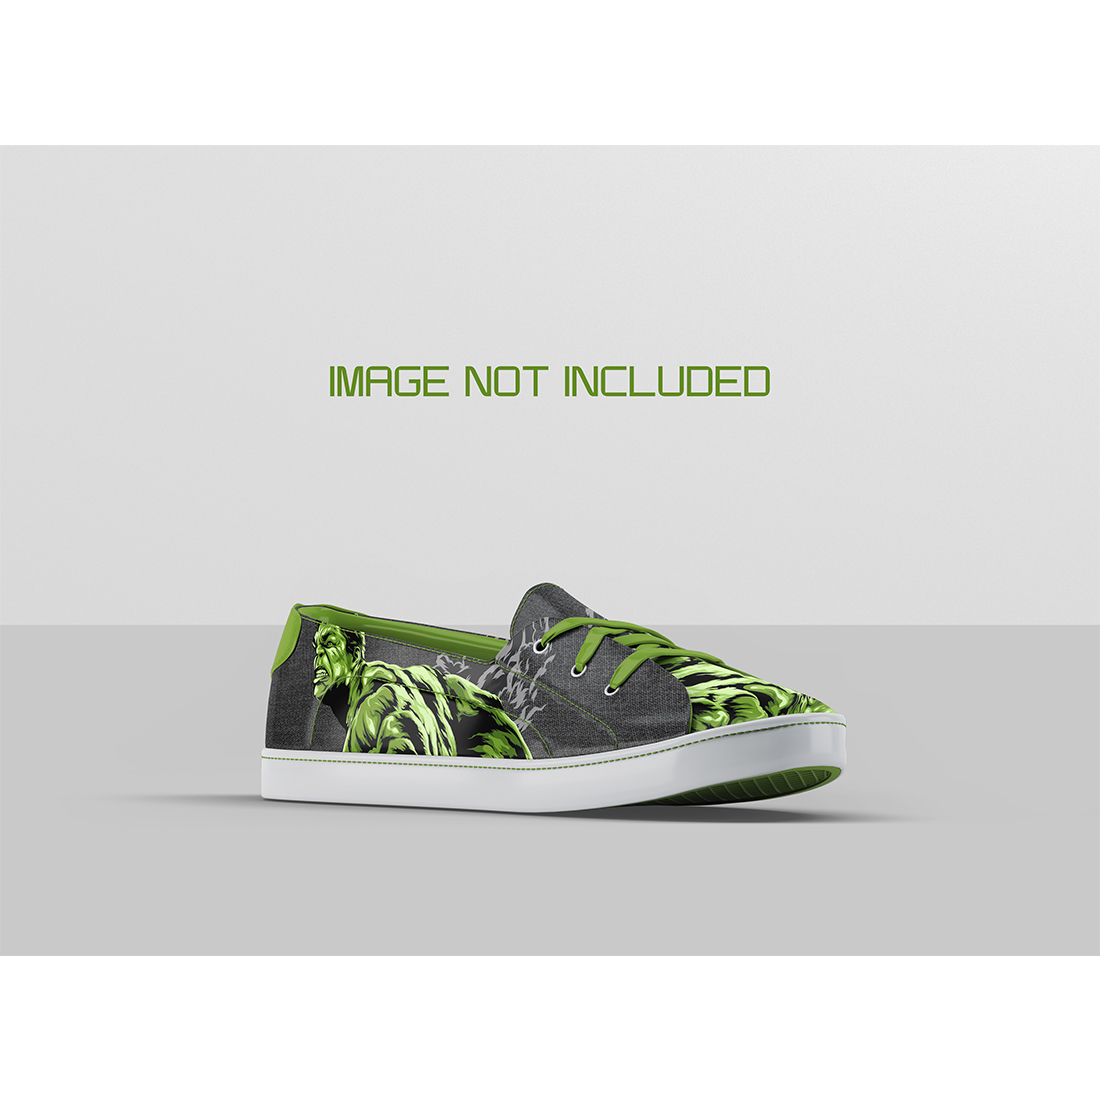 Sneaker Shoes Mockup preview image.